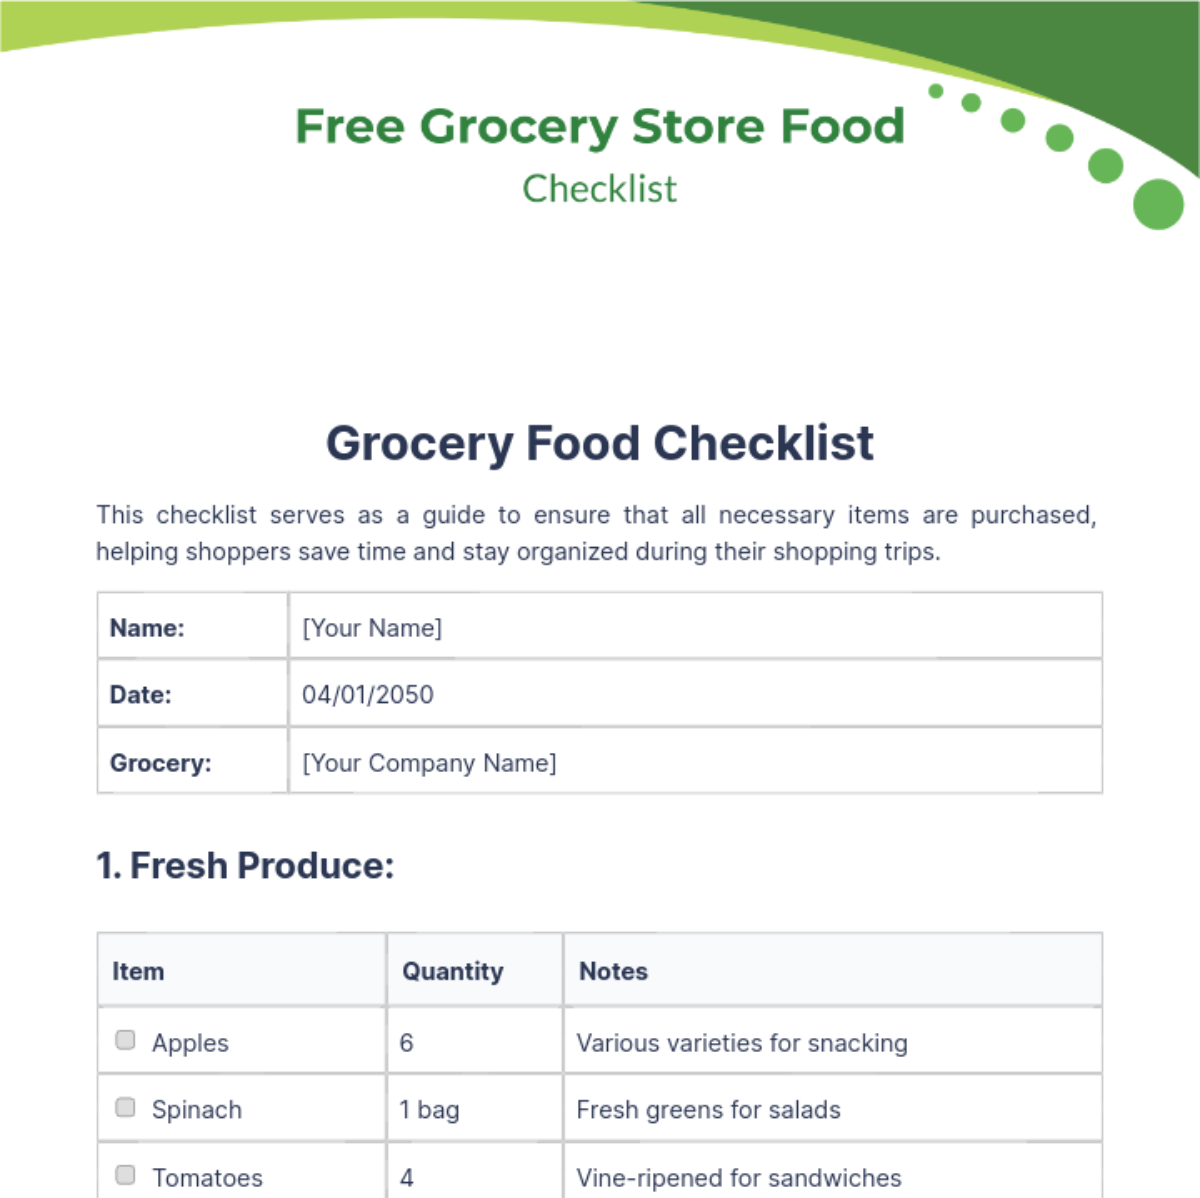 Free Grocery Store Food Checklist Template